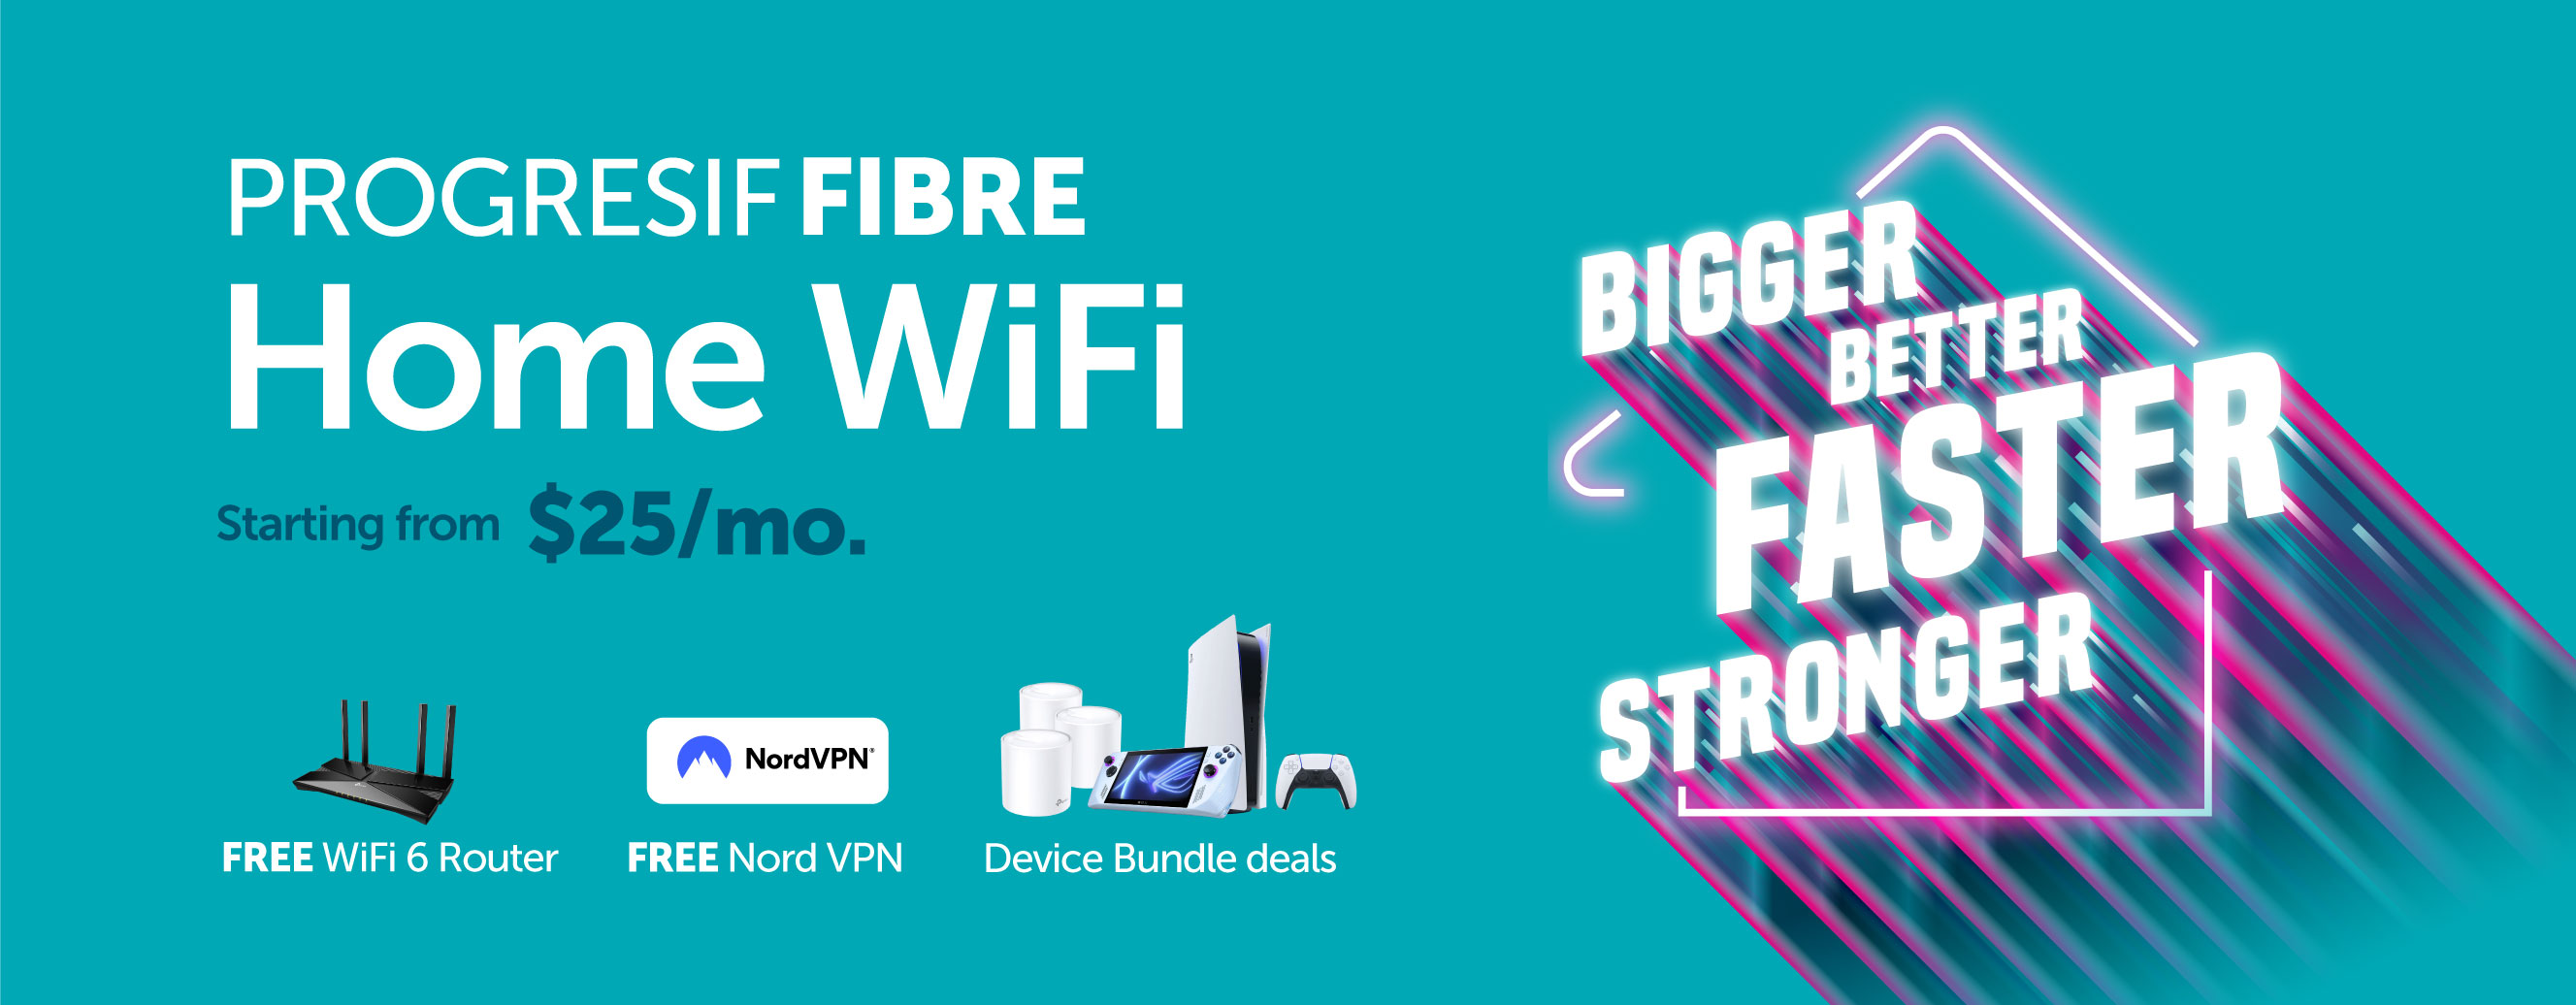 Home WiFi plan from $25/mo